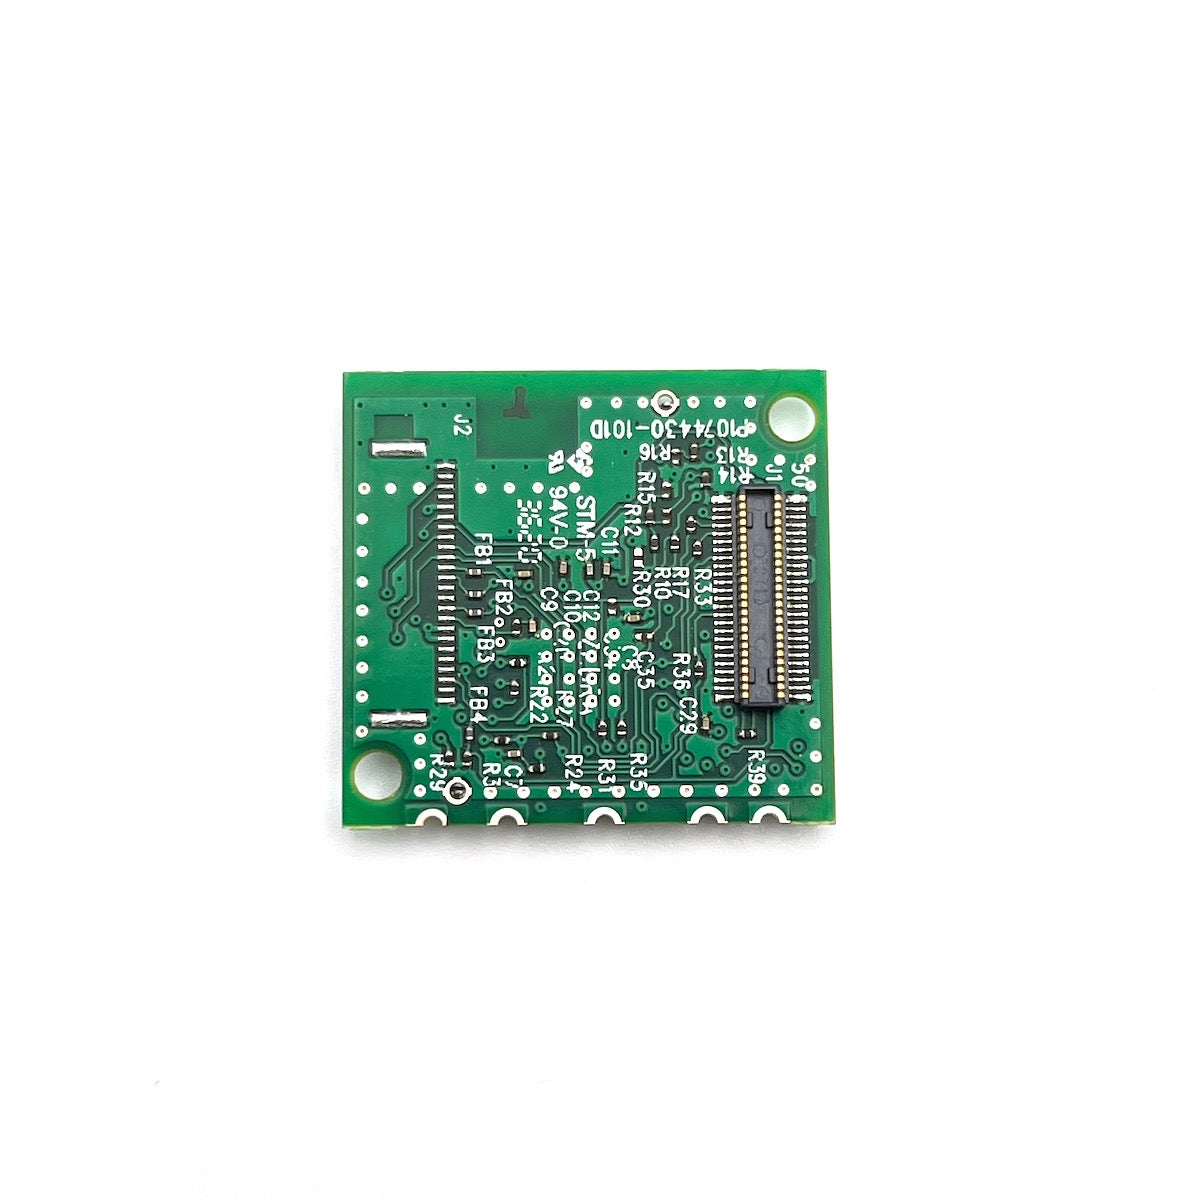 Bluetooth Module PCB for Zebra ZD410 ZD420 P1074430-02 with mount part used